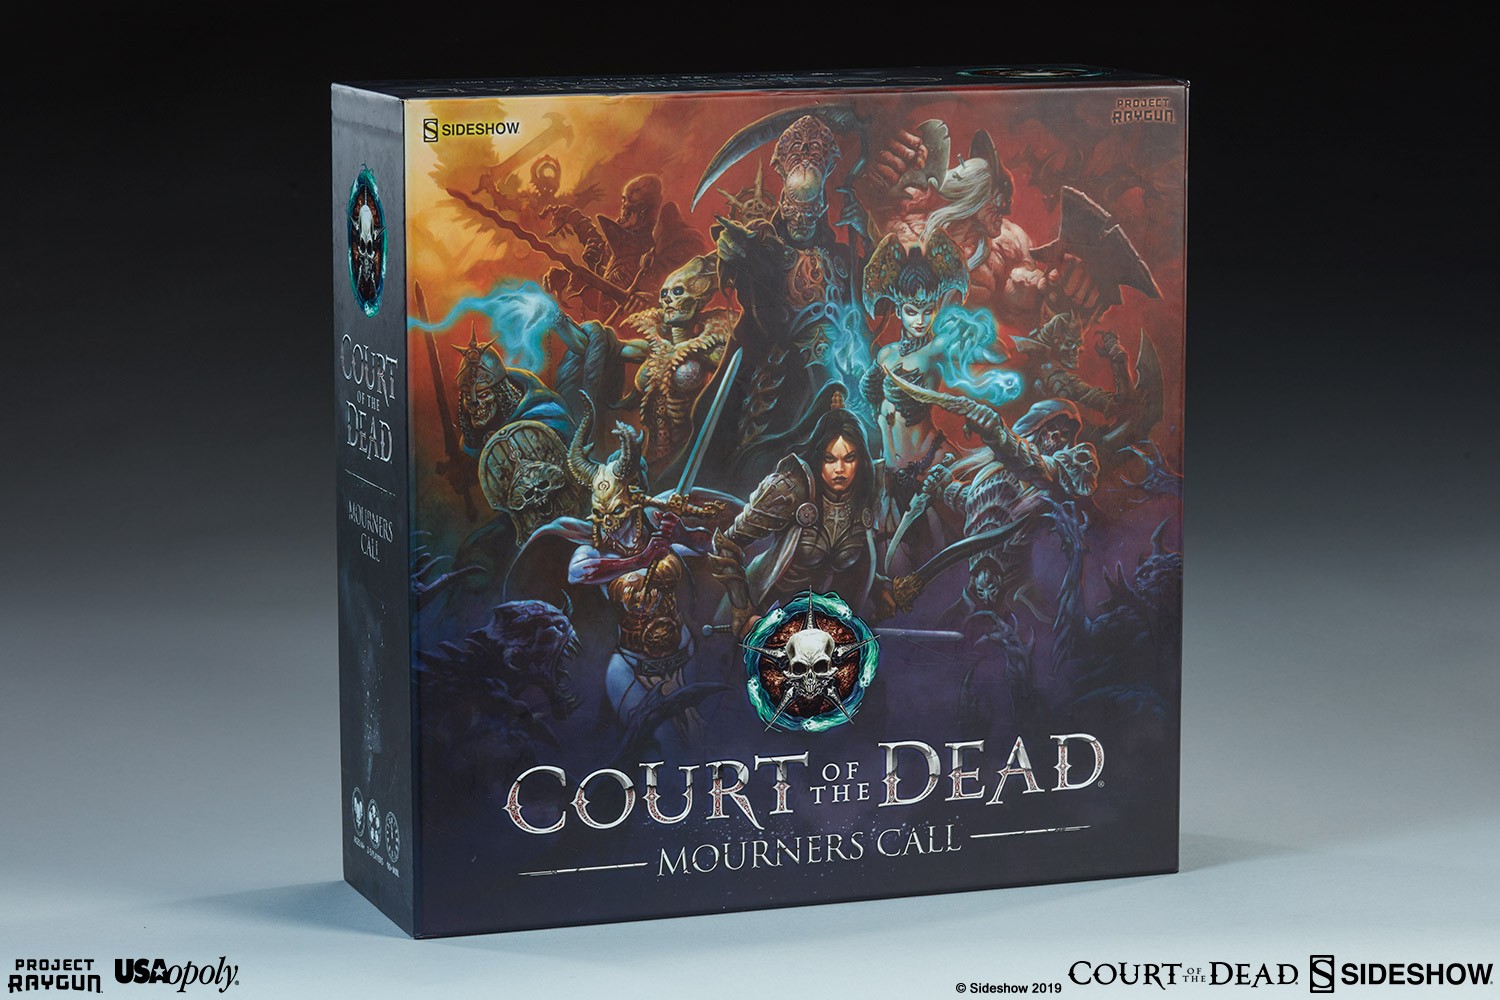 Court of the Dead Mourner's Call Game Exclusive Edition - Prototype Shown